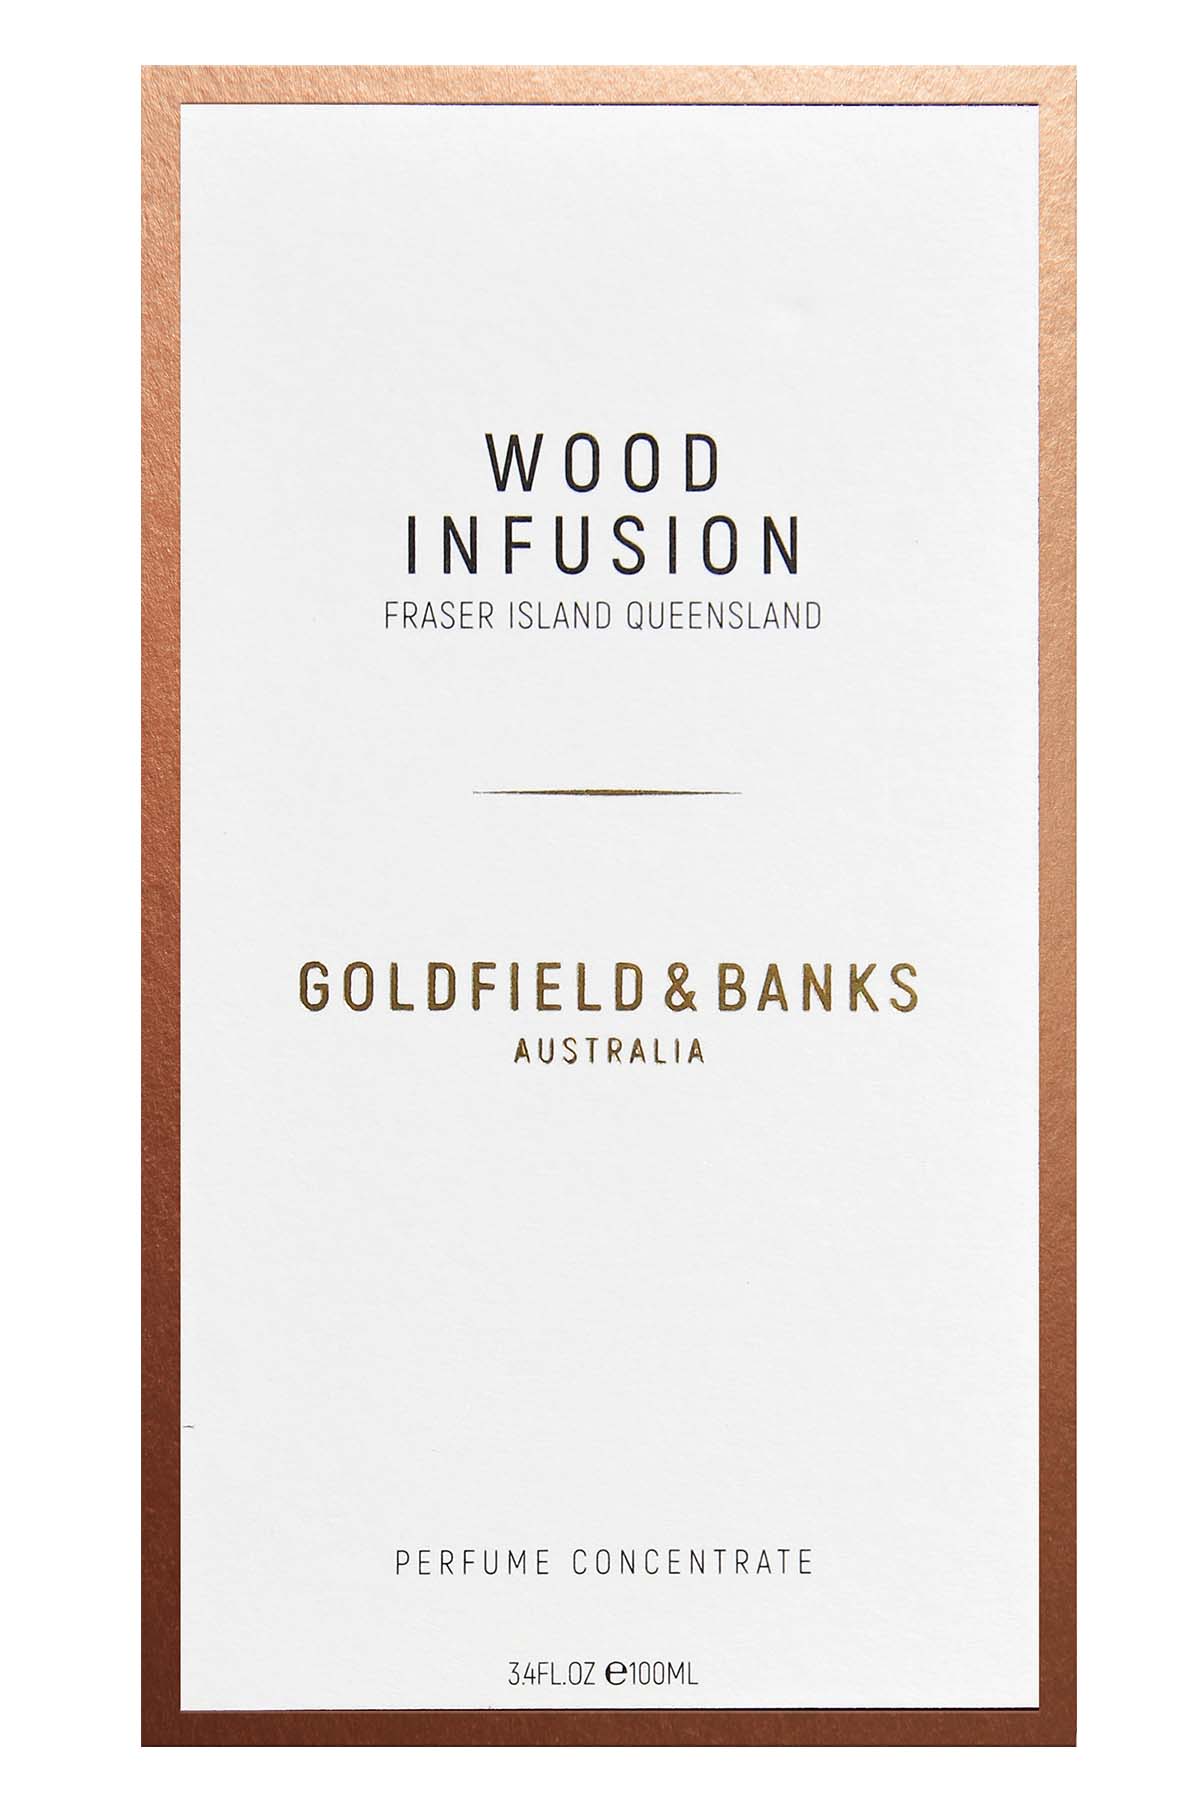 Goldfield & Banks Wood Infusion 100ml Perfume Concentrate